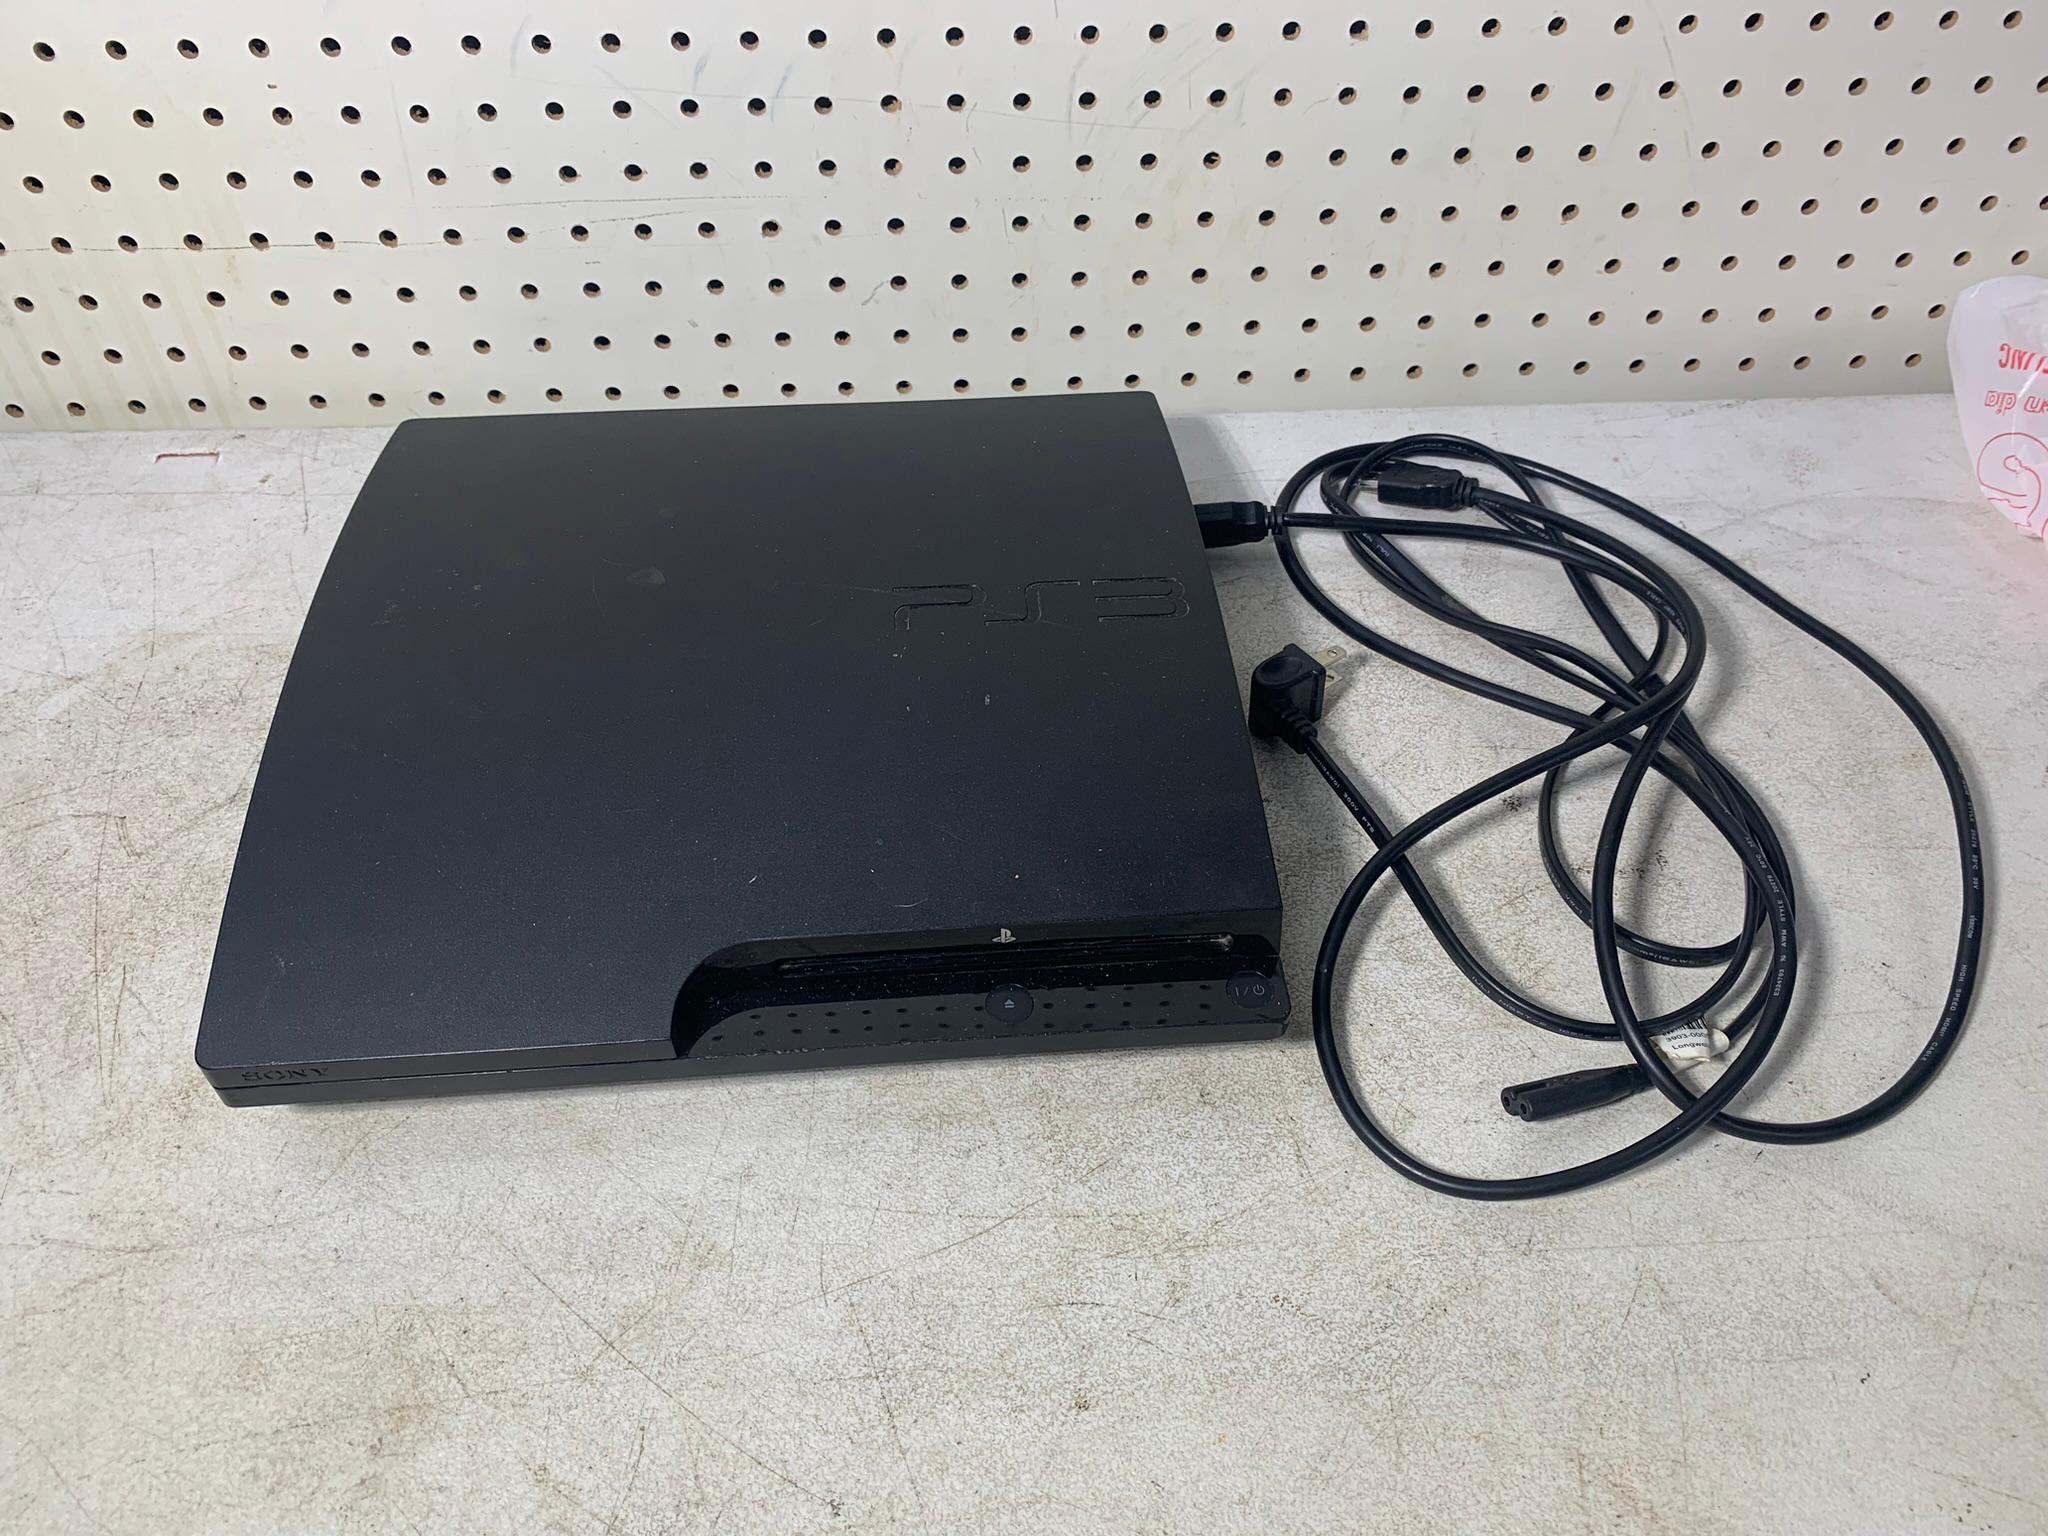 Sony PS3 160GB Console with Cords